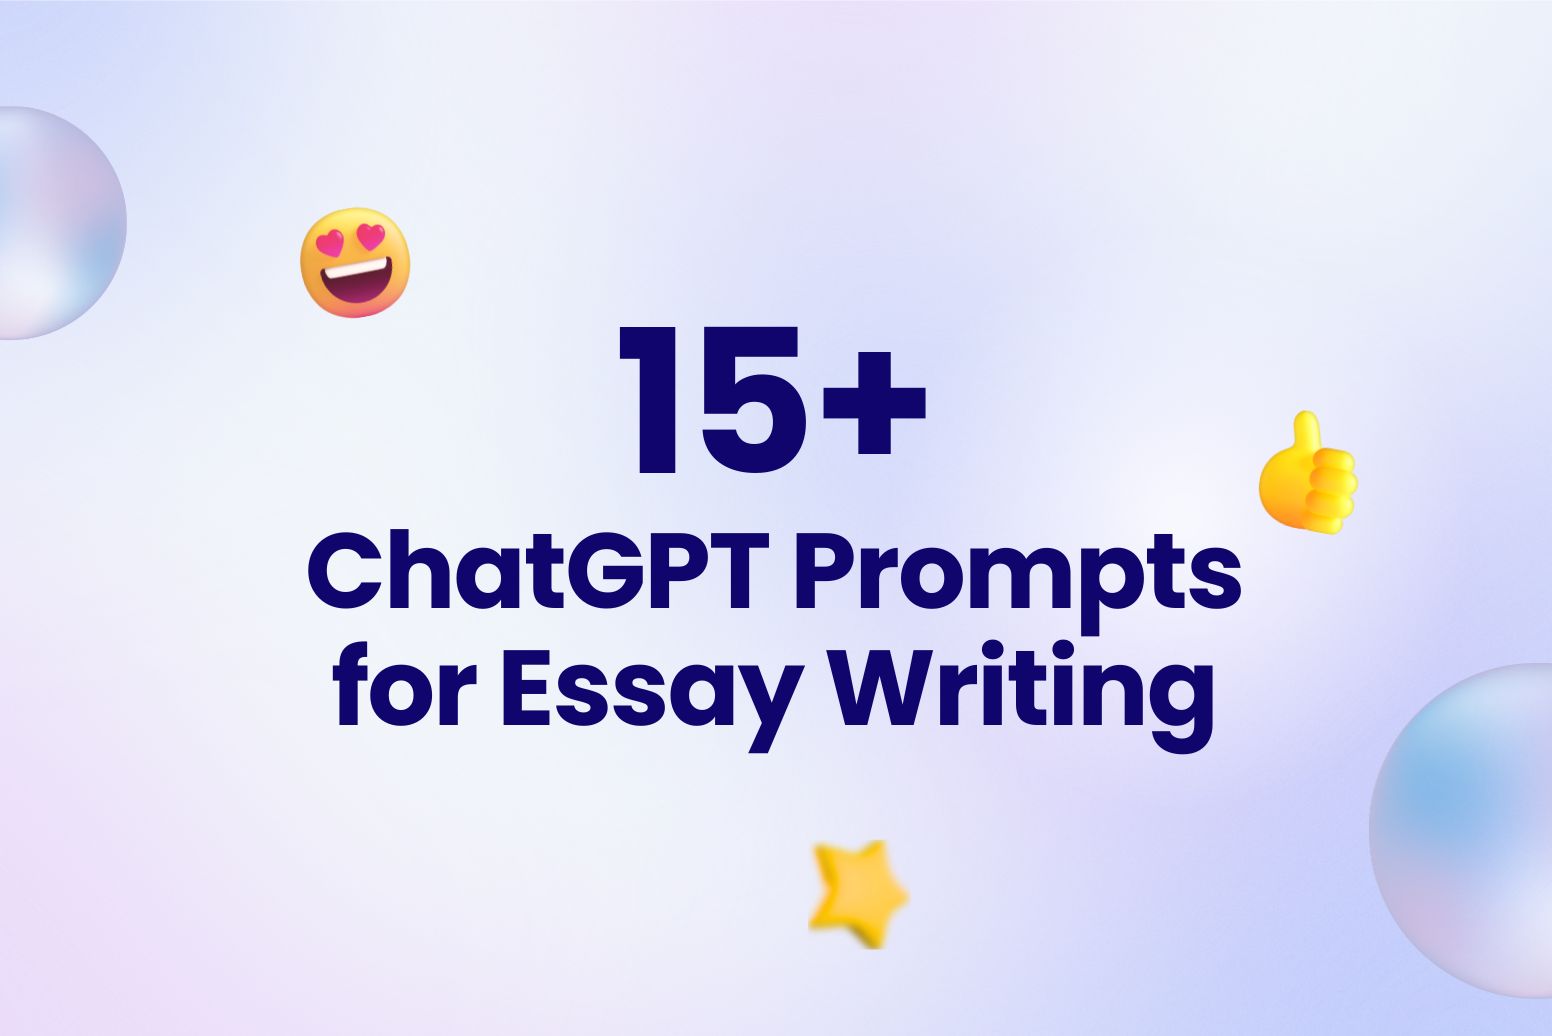 ChatGPT Prompts for Essay Writing